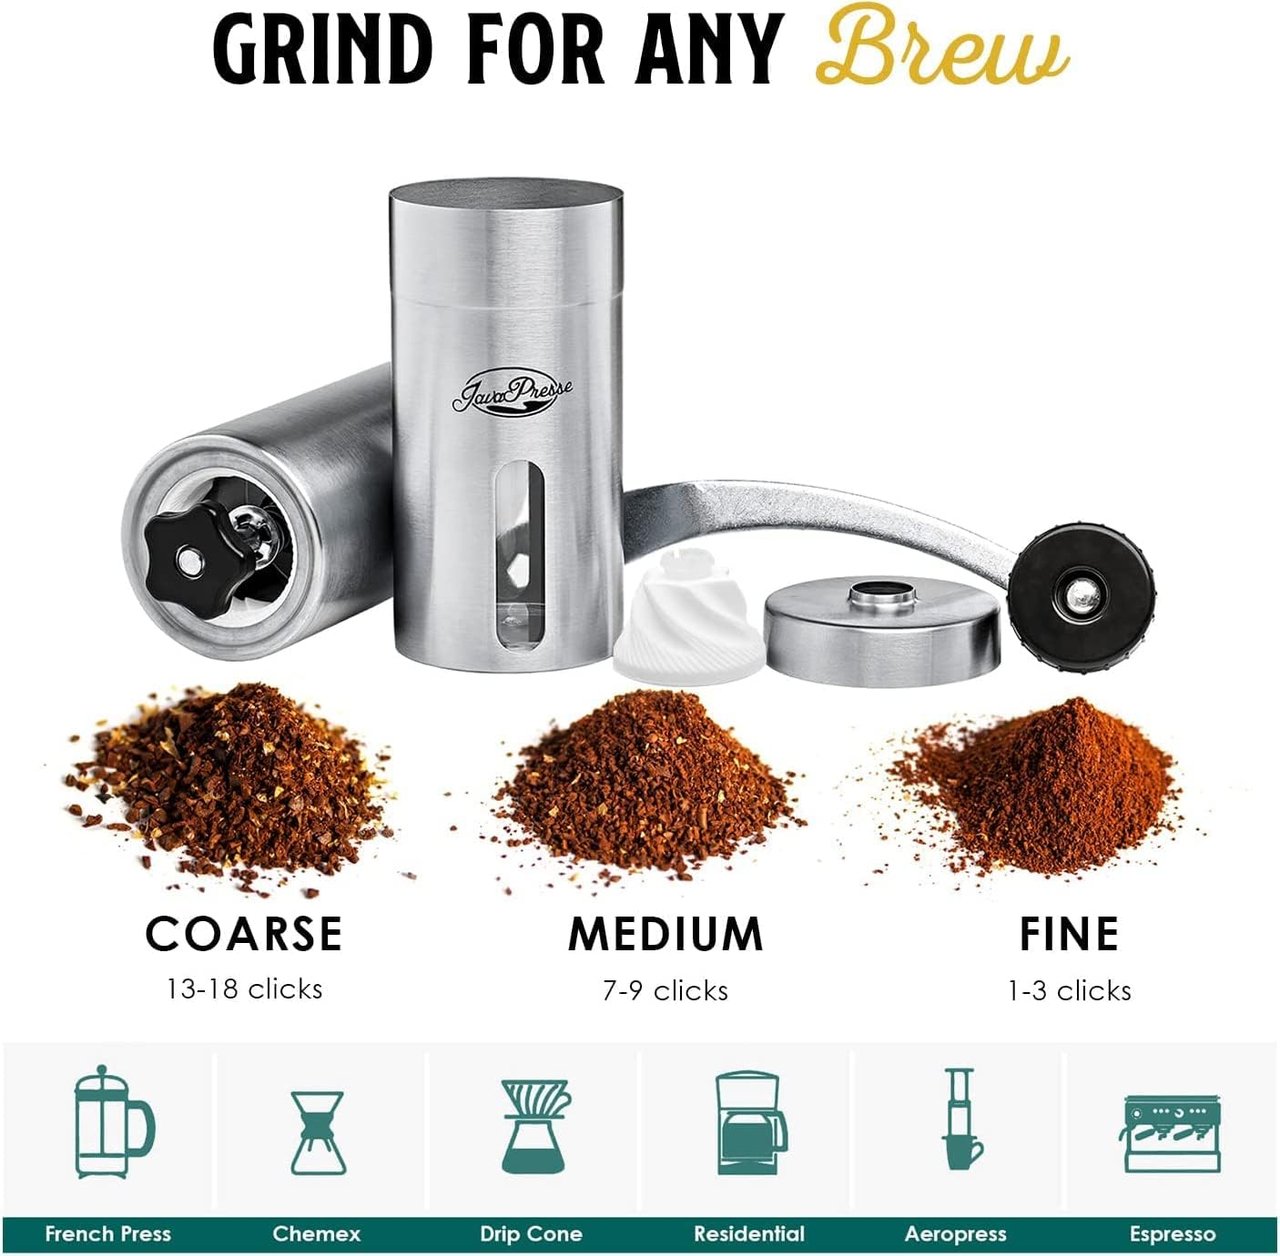 4 JavaPresse's Manual Coffee Grinder - Precision Coffee Bean Grinder with 18 Customizable Grind Levels, Premium Stainless Steel Manual Burr Coffee Grinder with Hand Crank - Exceptional Present, Ideal for Outdoor Adventures.